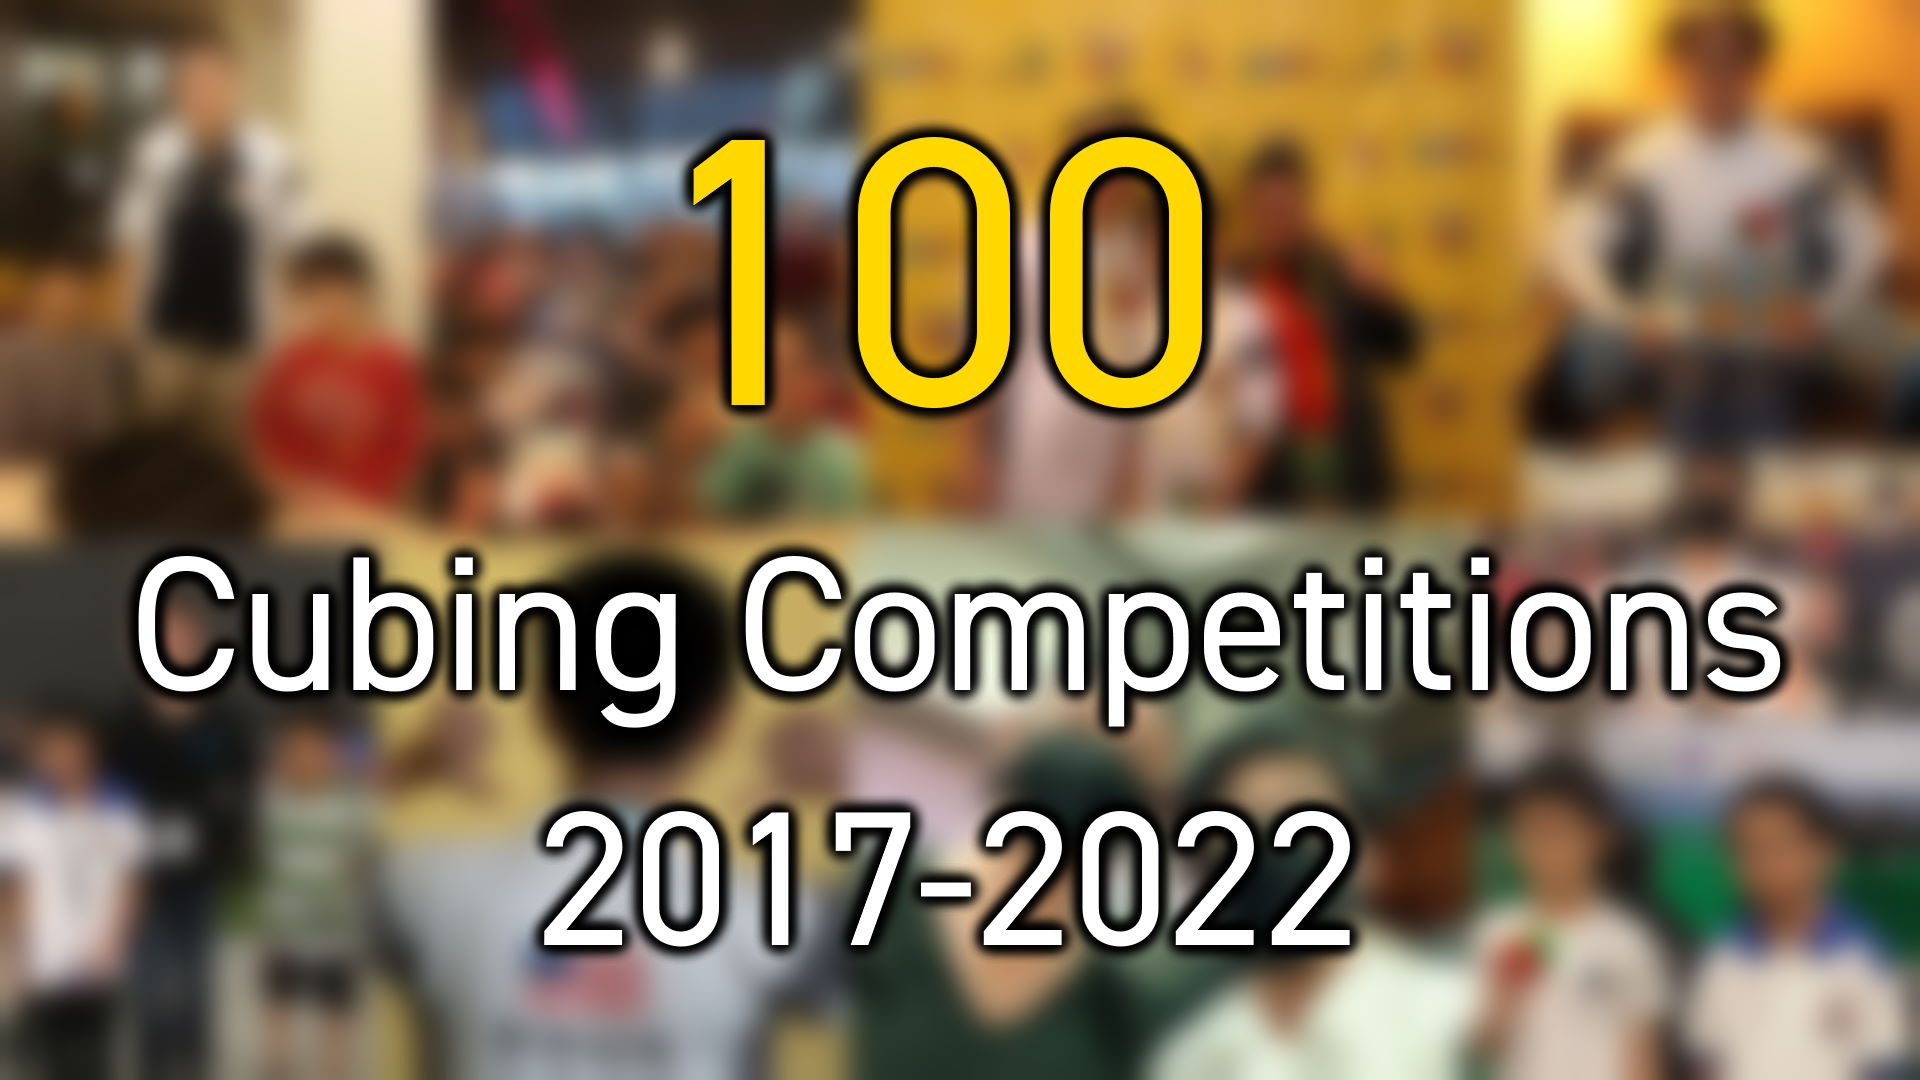 100 Cubing Competitions! Max Siauw